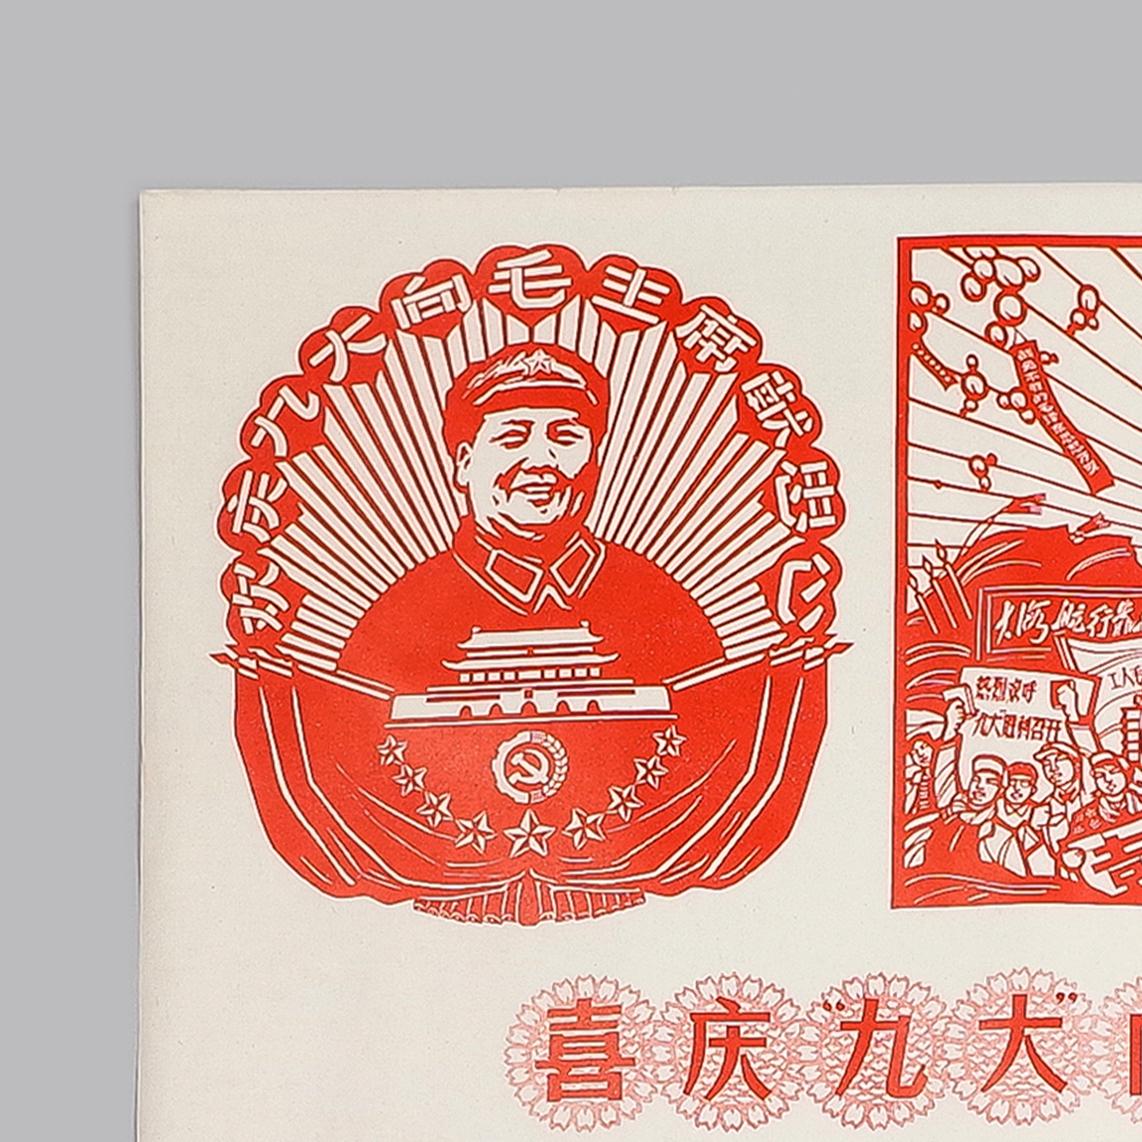 Original Mao propaganda poster celebrating the Ninth Congress and presenting loyalty to Chairman Mao, 1969. Excellent condition.
 